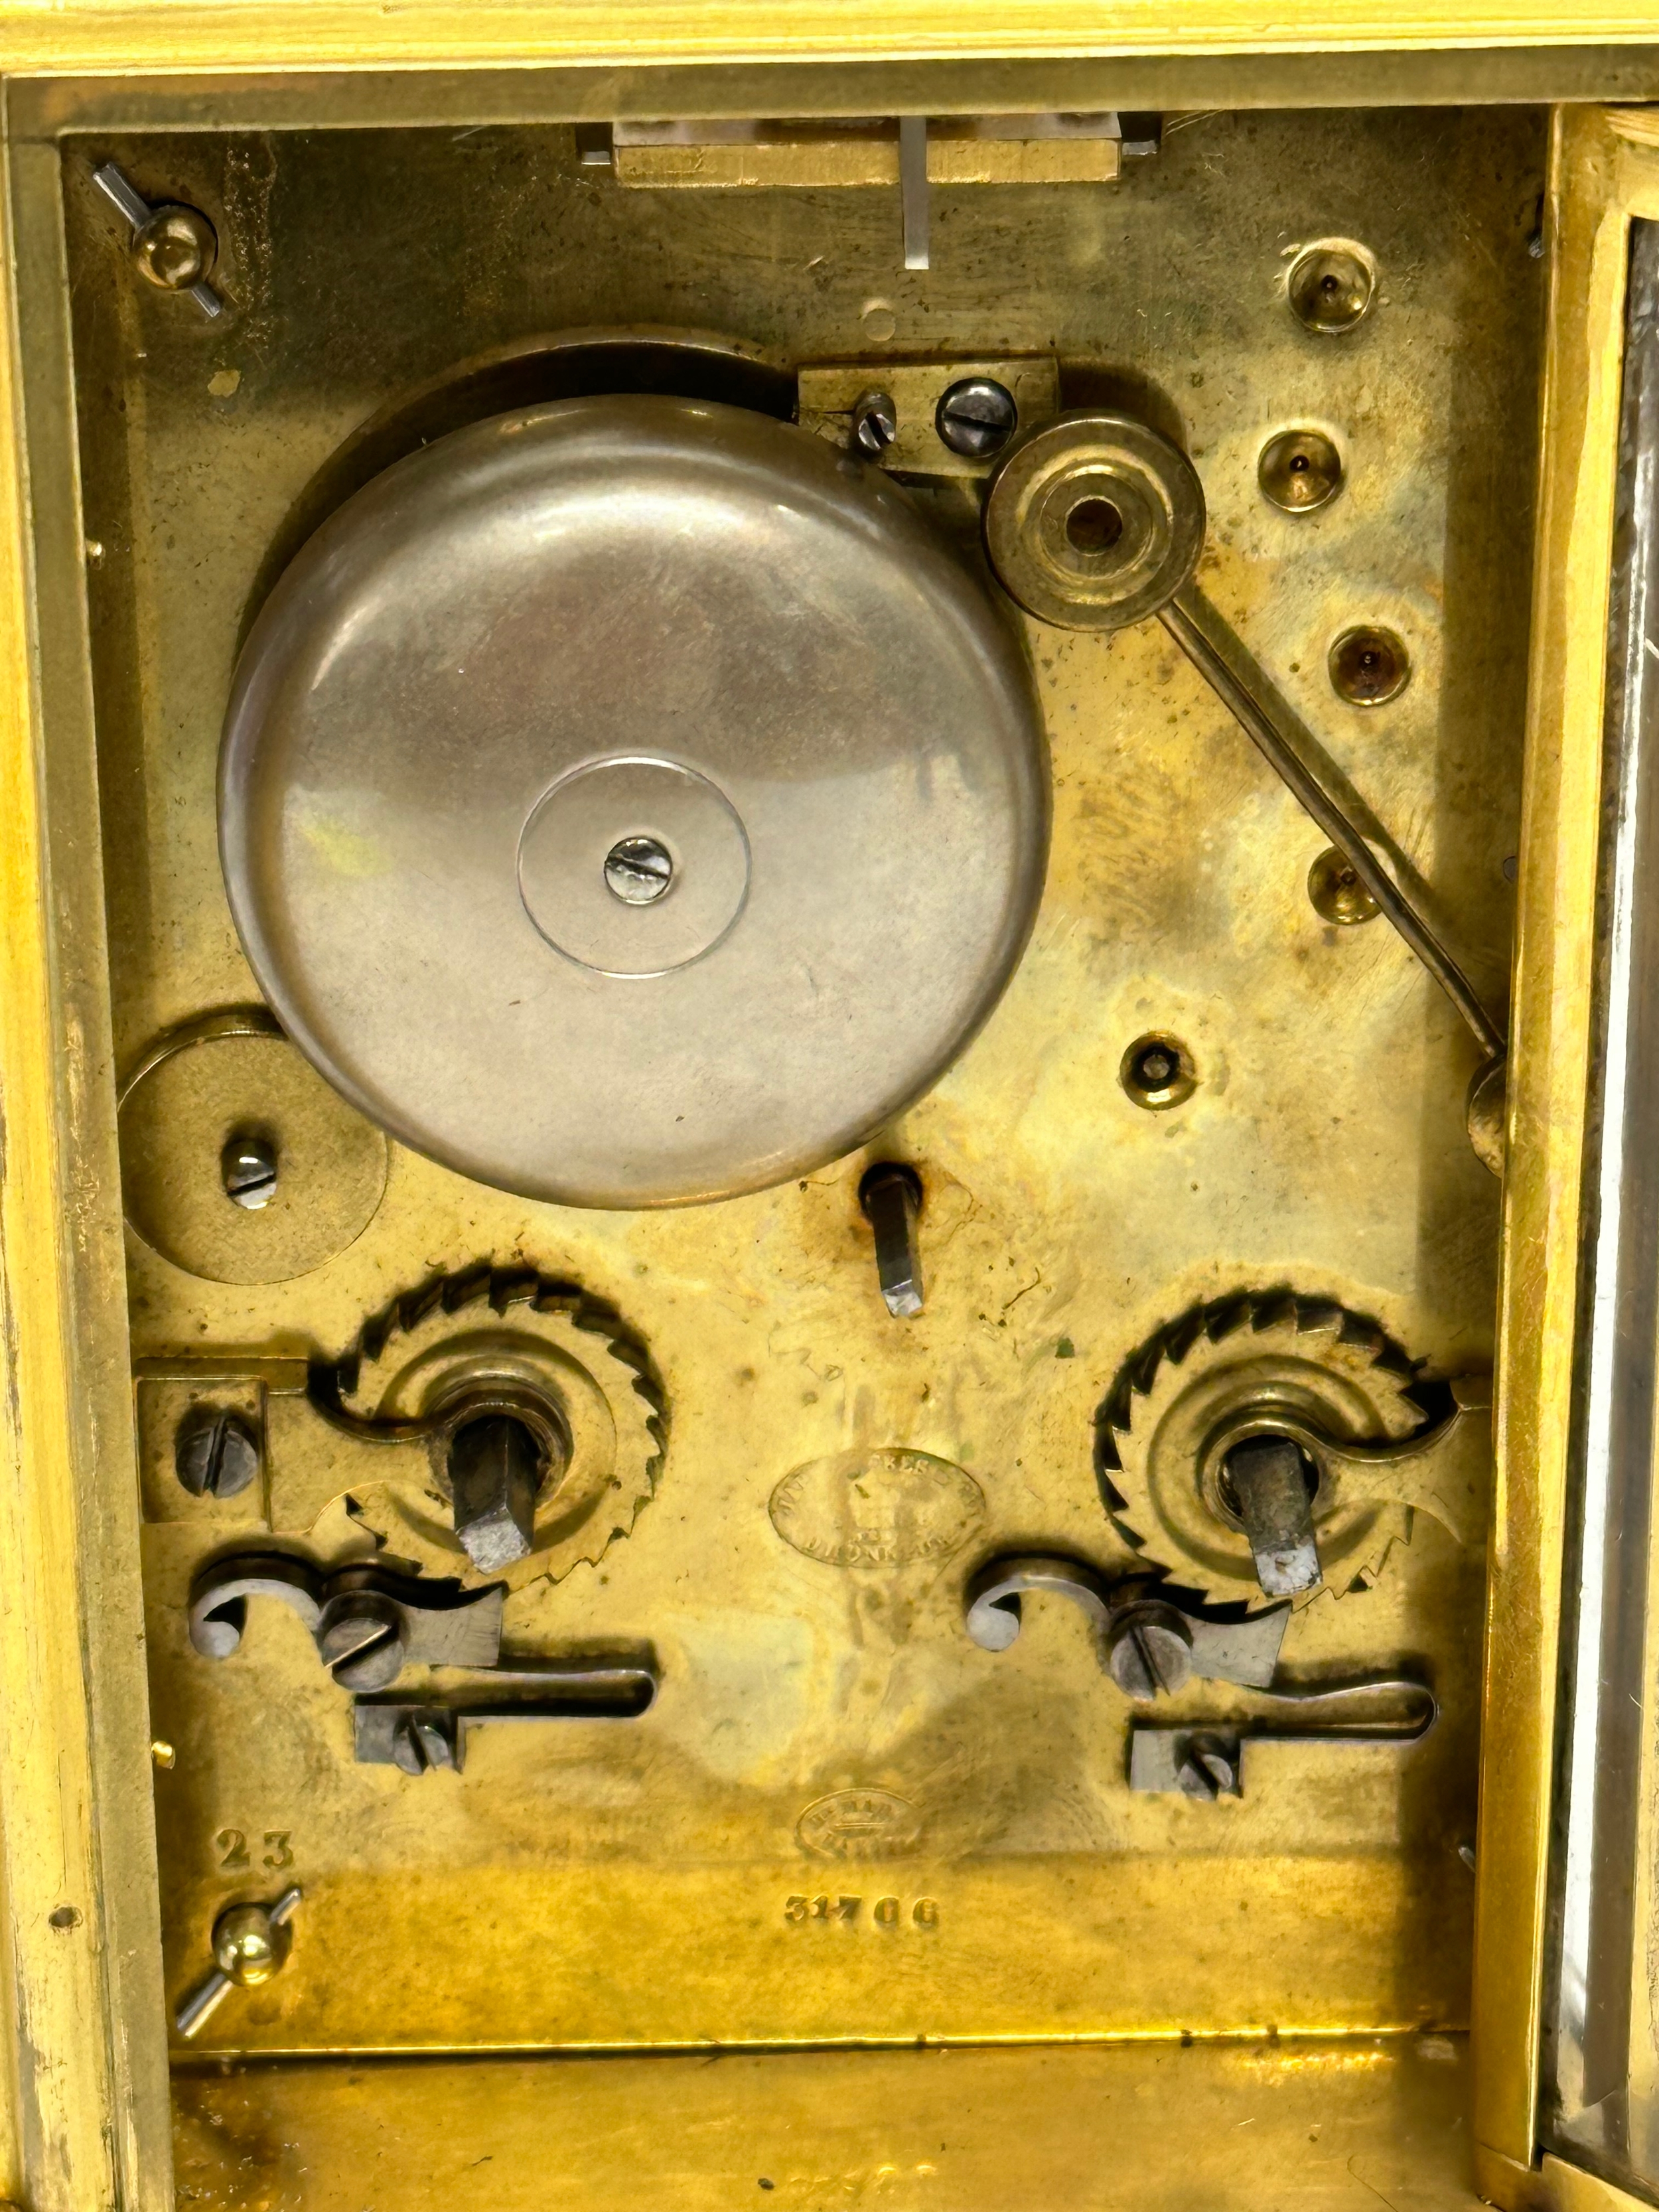 A rare mid 19th century Henry Marc brass Time Repeater Carriage Clock with 4 bevelled glass panels - Image 5 of 6